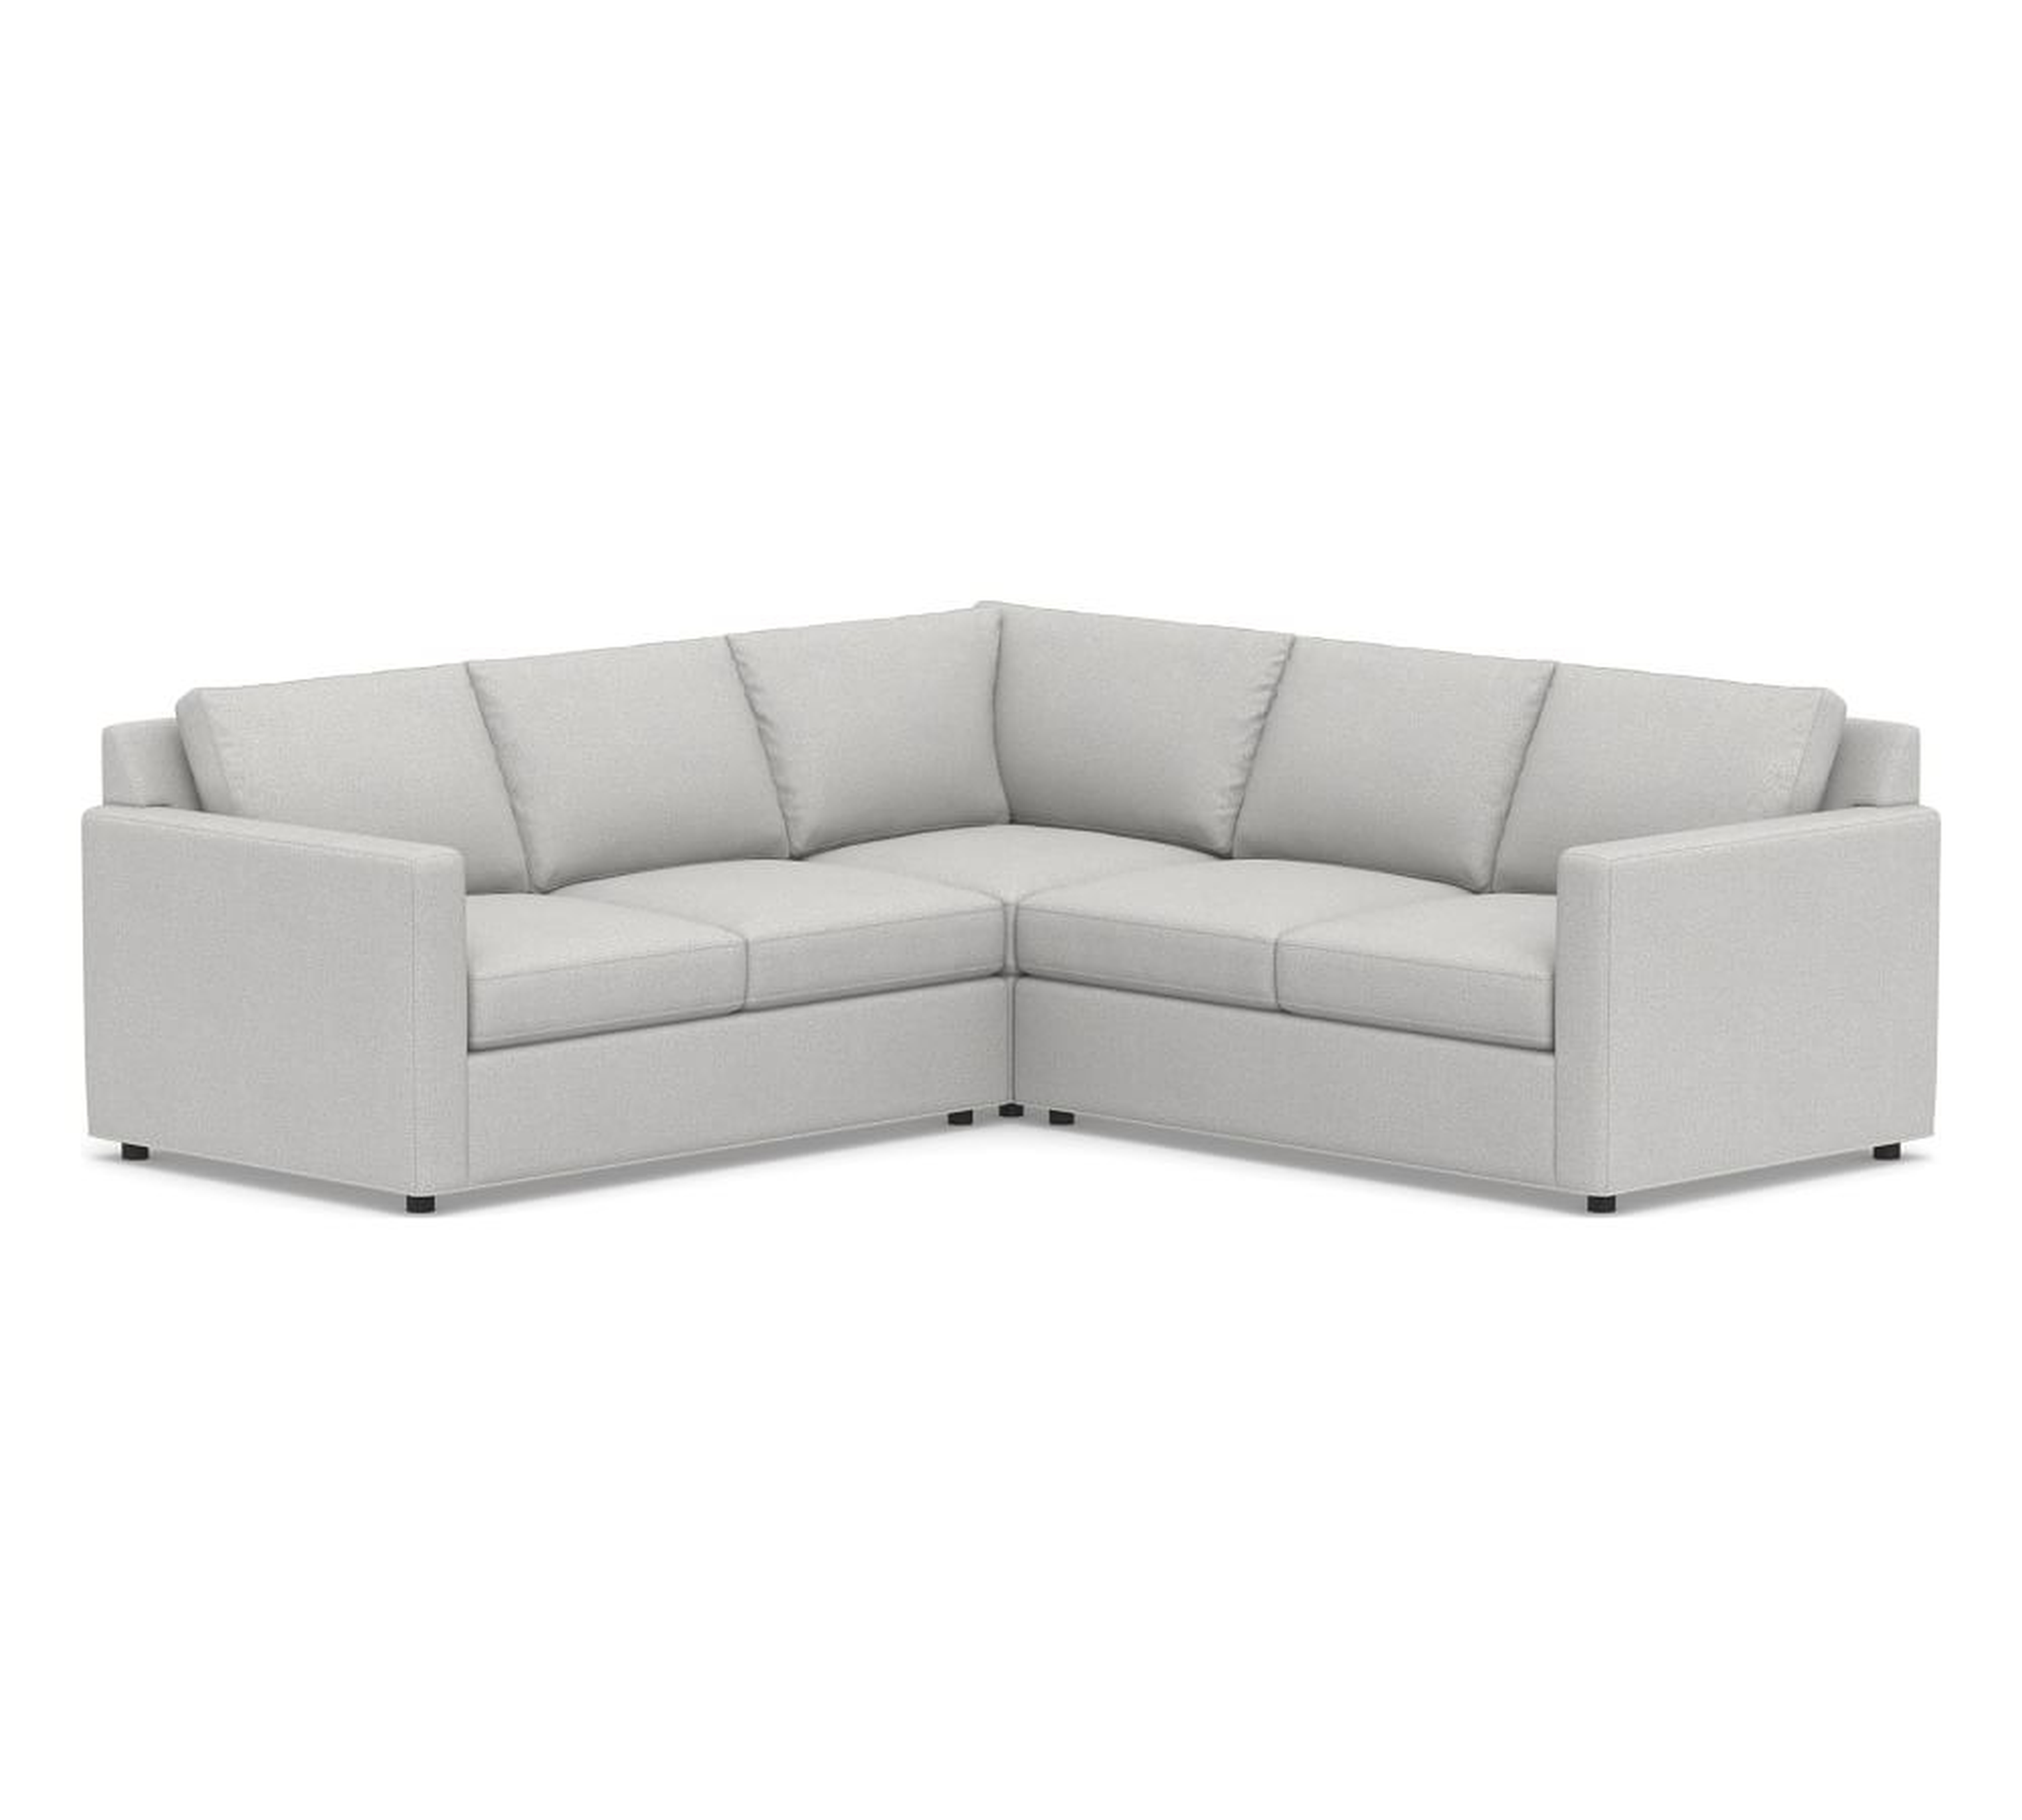 Sanford Square Arm Upholstered 3-Piece L-Shaped Corner Sectional, Polyester Wrapped Cushions, Park Weave Ash - Pottery Barn